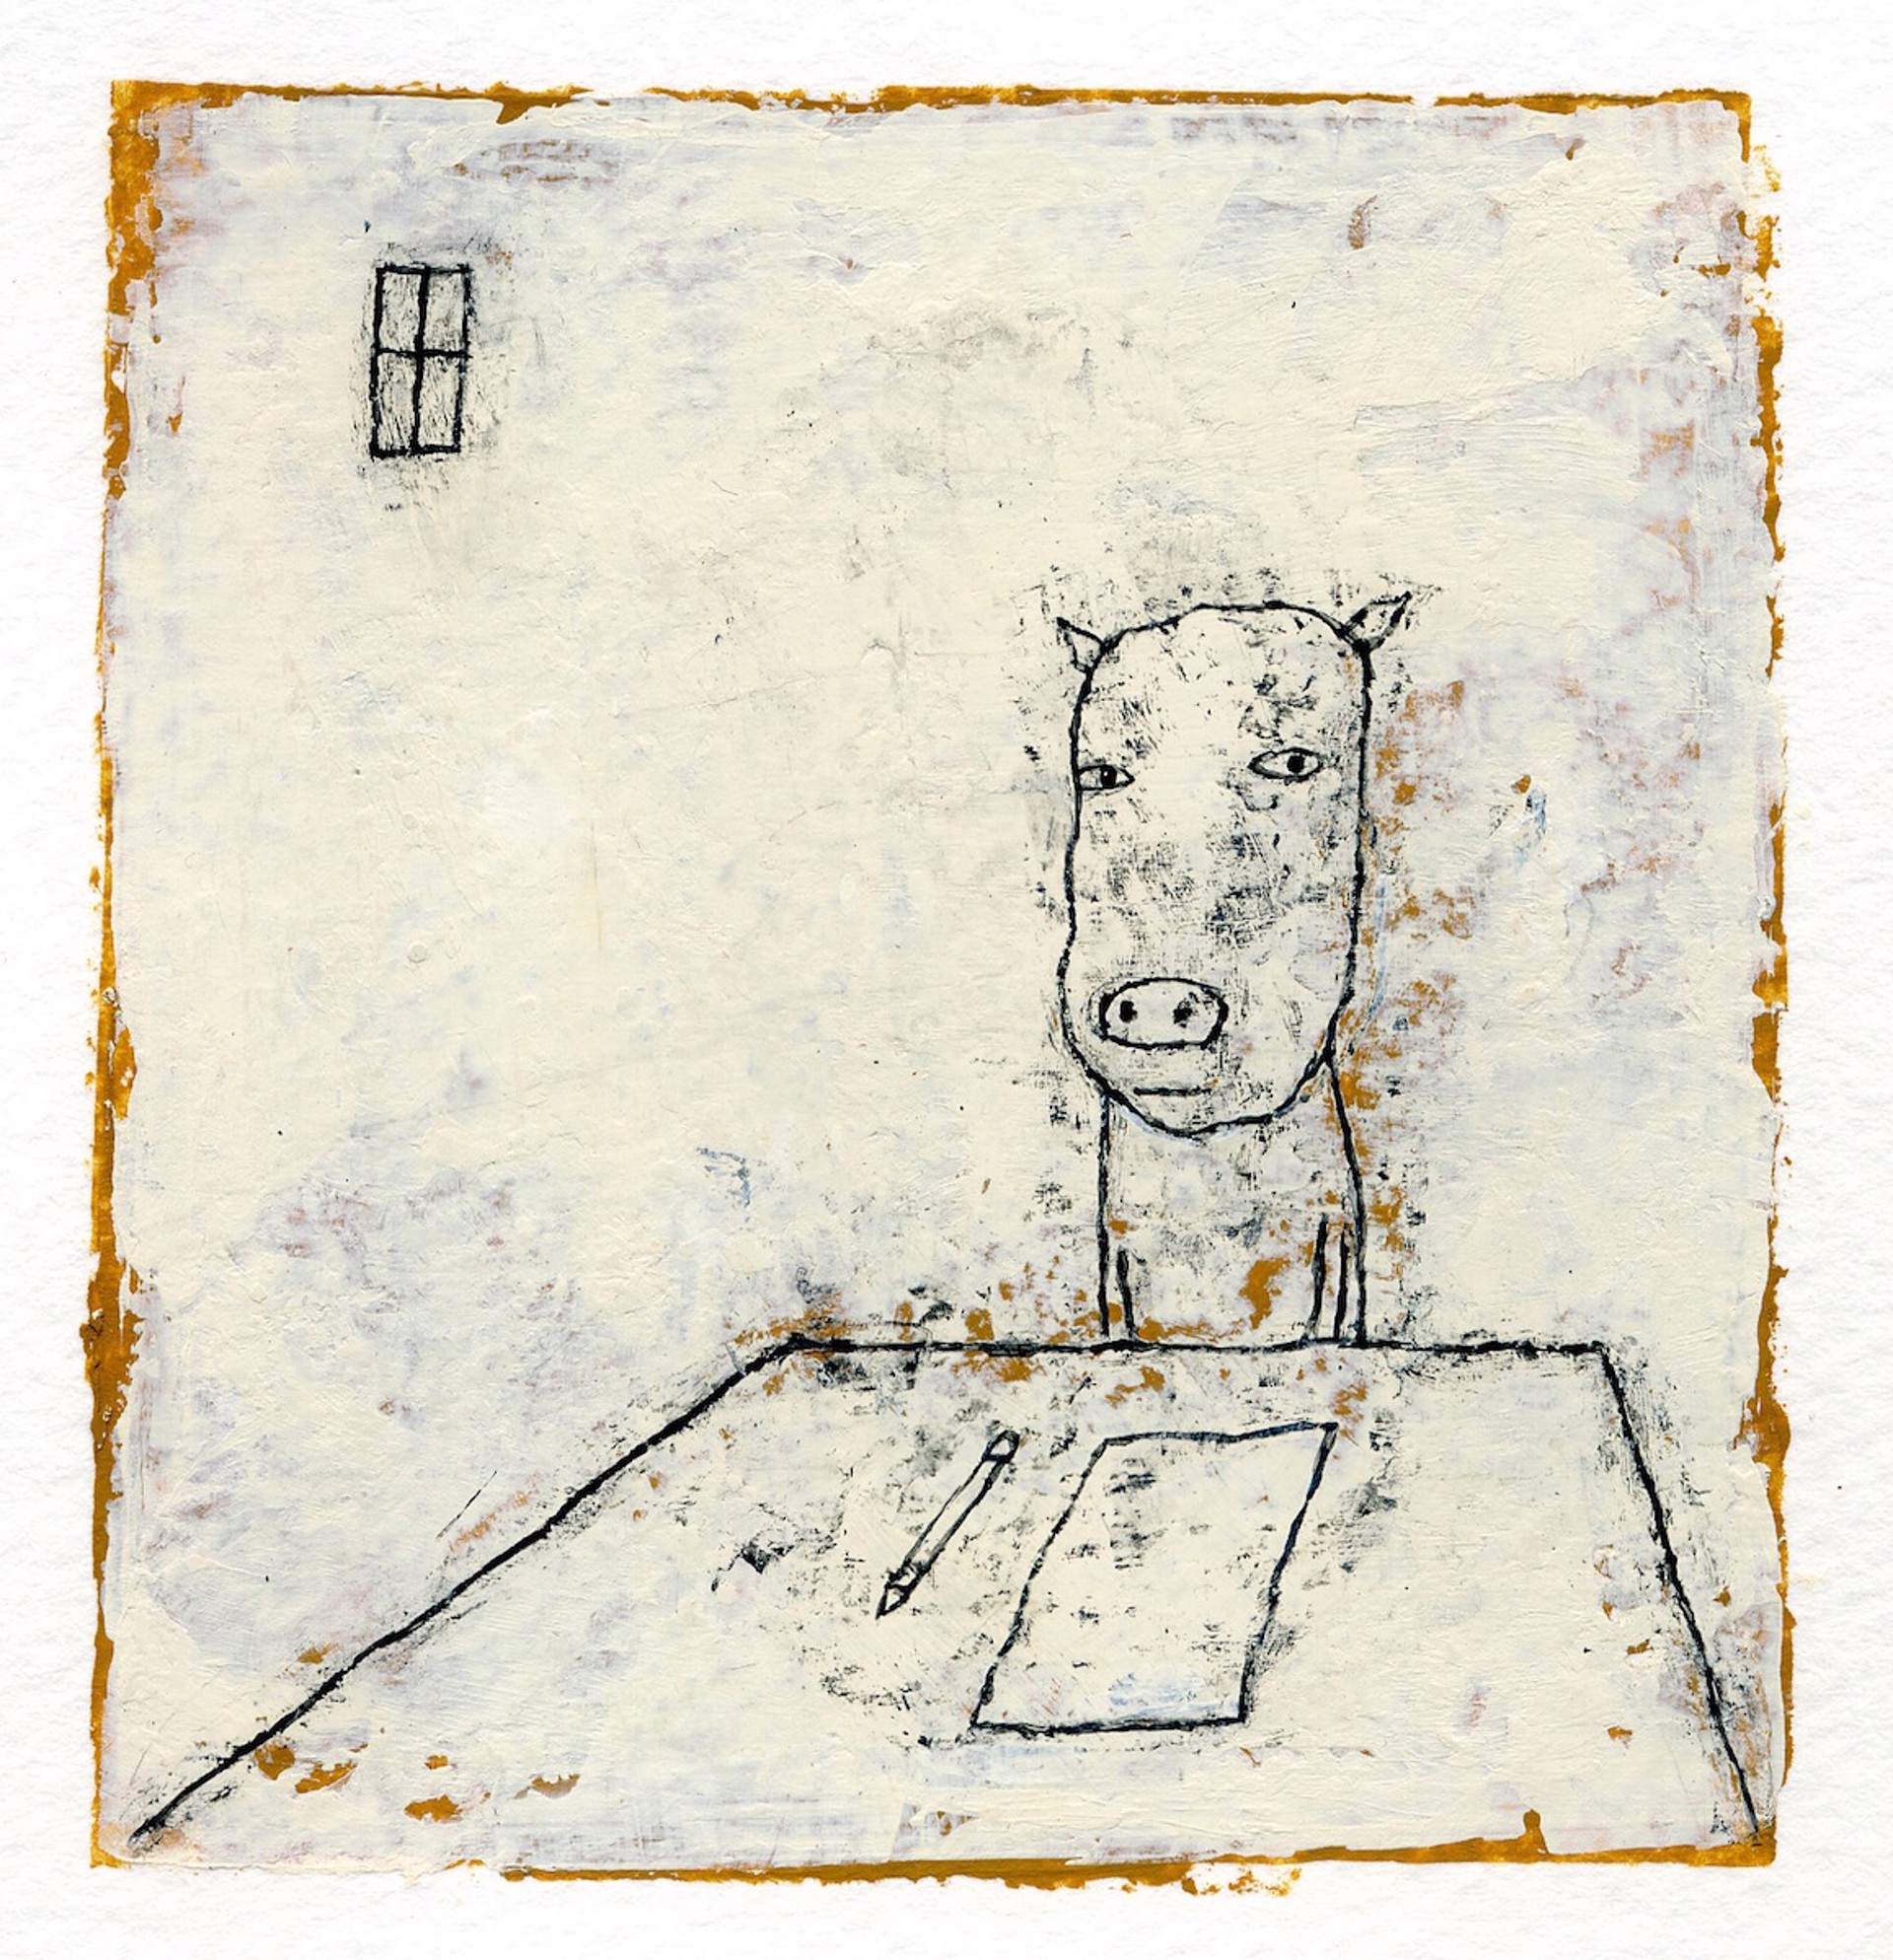 At Desk (Pig) by Rebecca Doughty